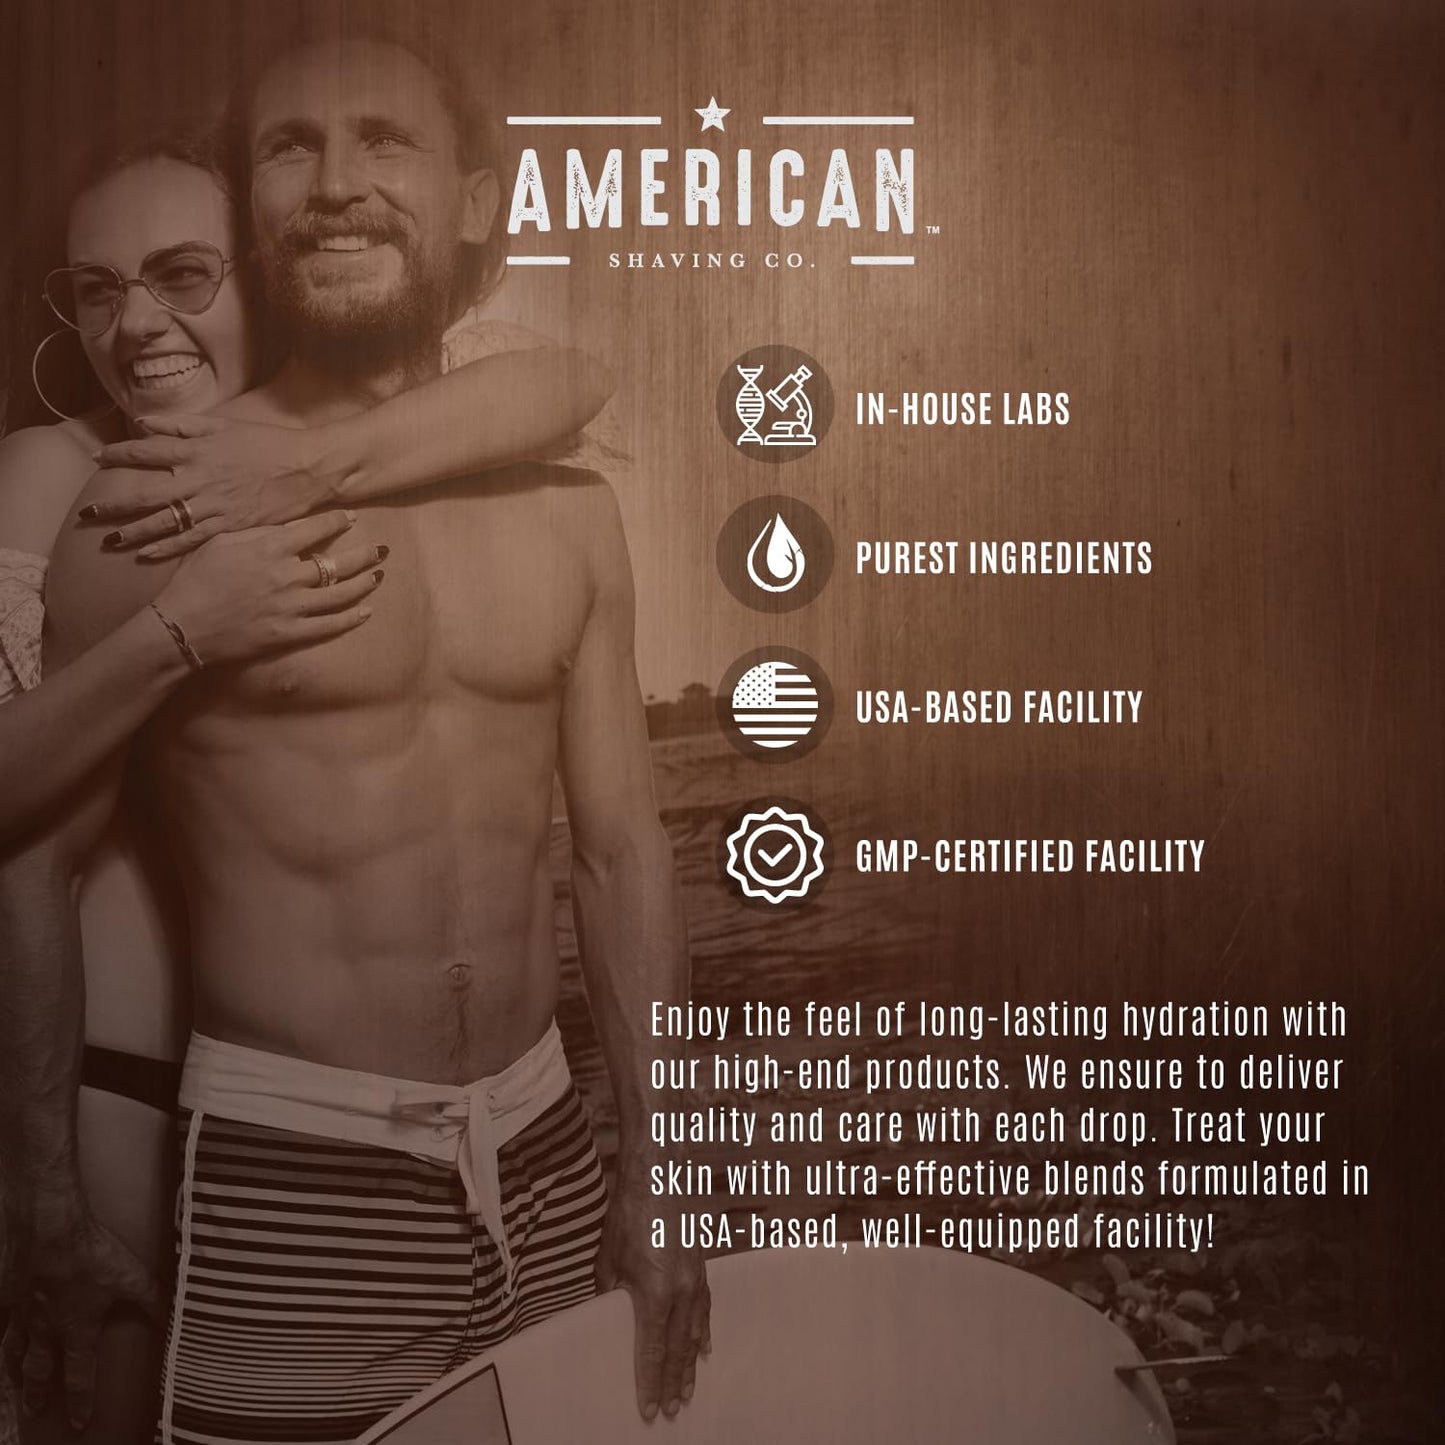 American Shaving Co. Beach Body Cream for Men, 8 Oz Bottle, Made in USA, Quick Absorption, Quality Potent Ingredients, Deep Penetration, Non-GMO, GMP Certified, Cruelty-Free Products